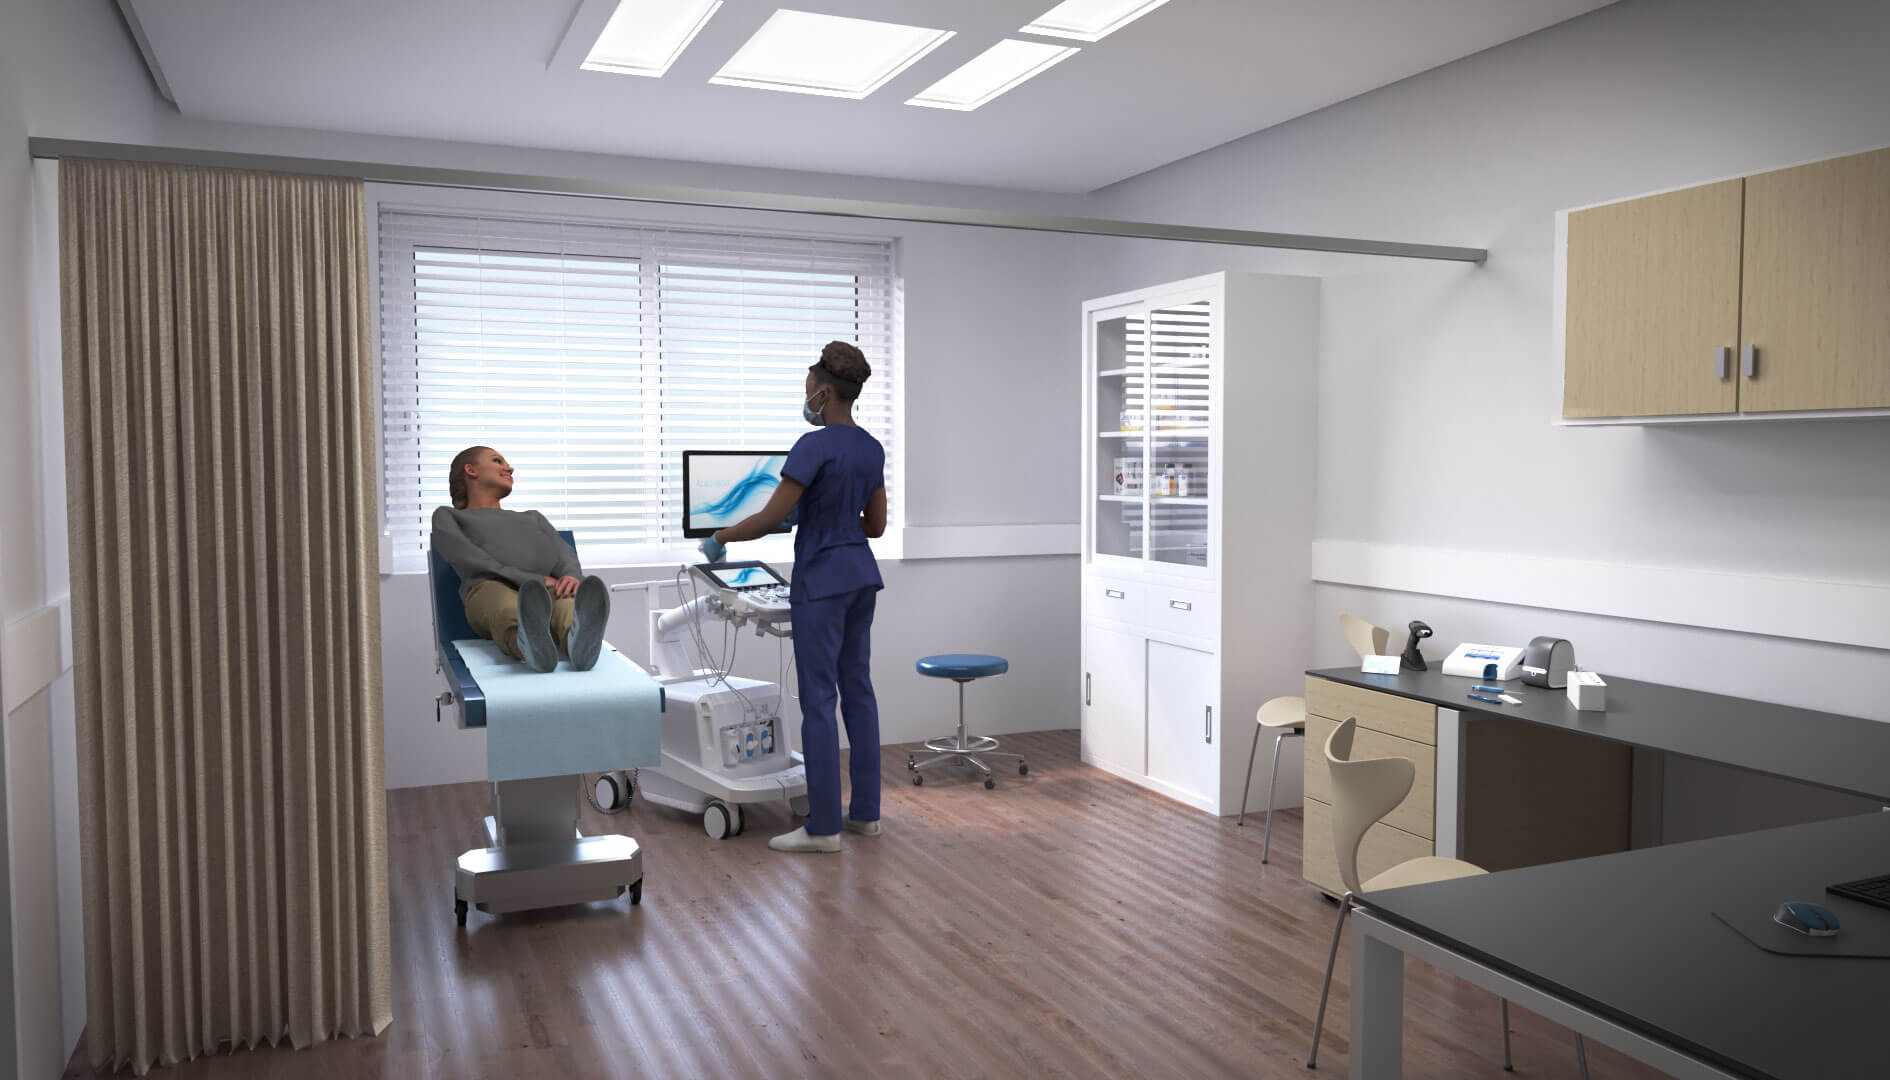 3D visual of hospital room with patient and nurse